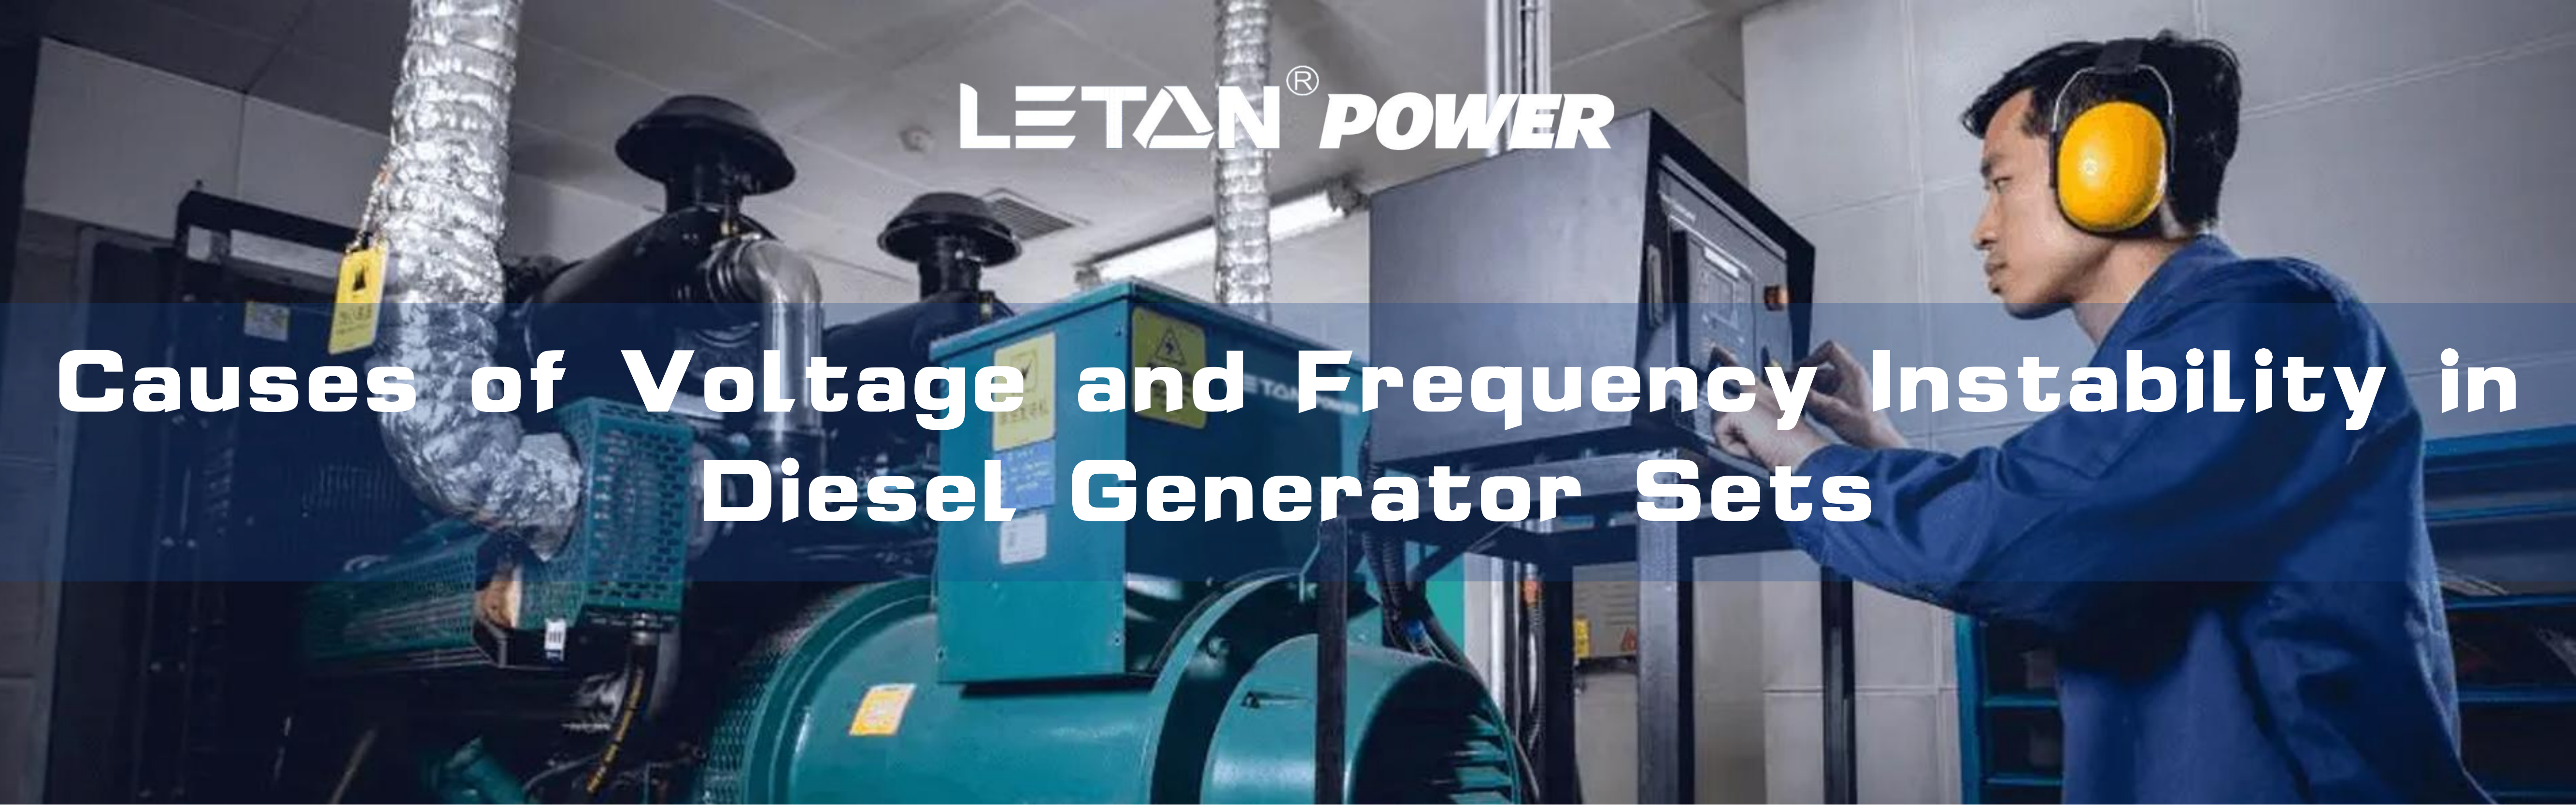 Causes of Voltage and Frequency Instability in Diesel Generator Sets